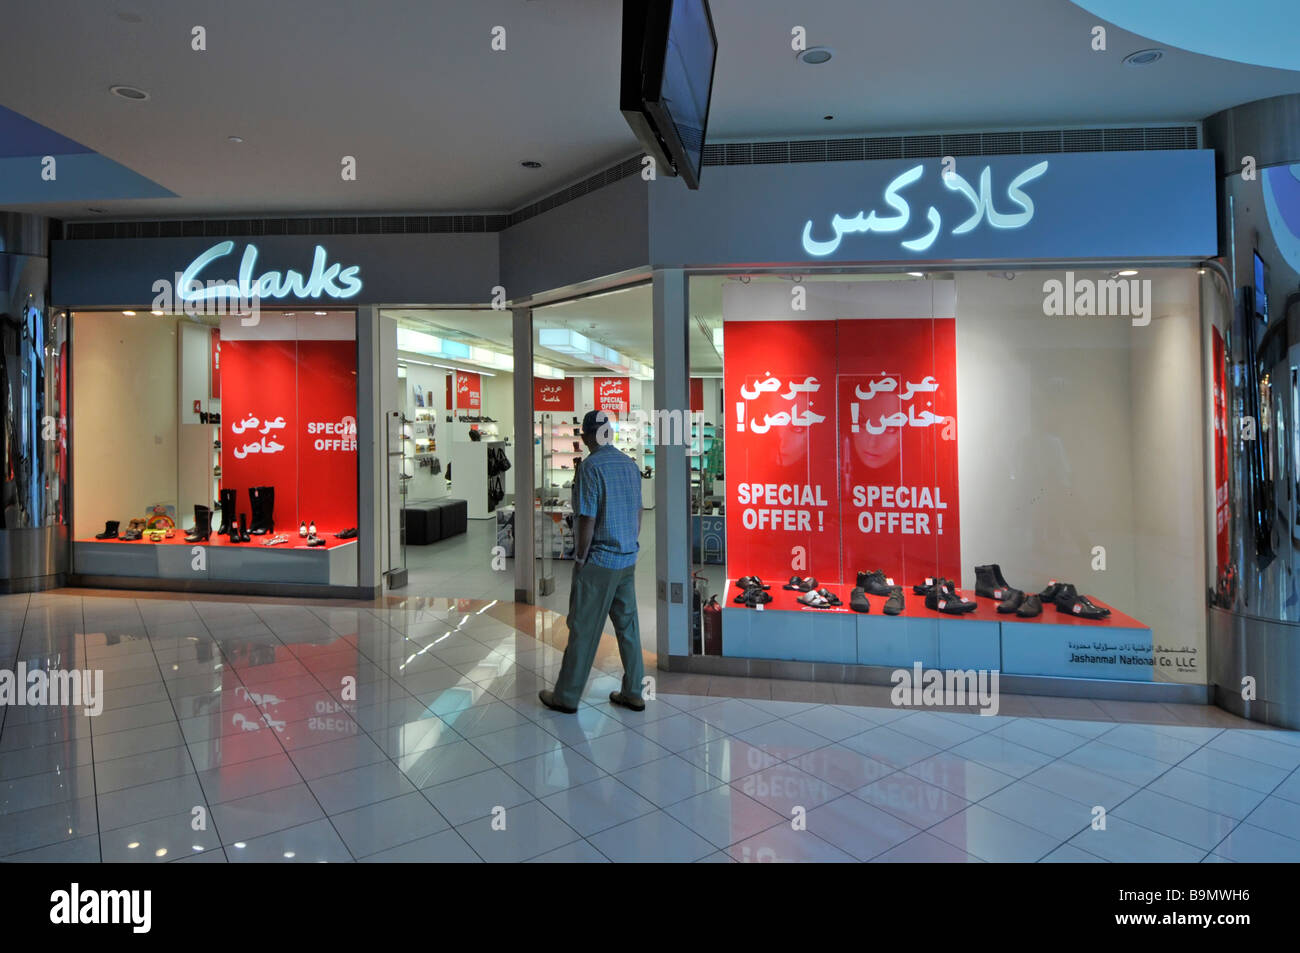 Abu Dhabi Marina shopping Mall shopper outside shoe shop retail business front window & bilingual sign special posters UAE Middle East Stock Photo - Alamy